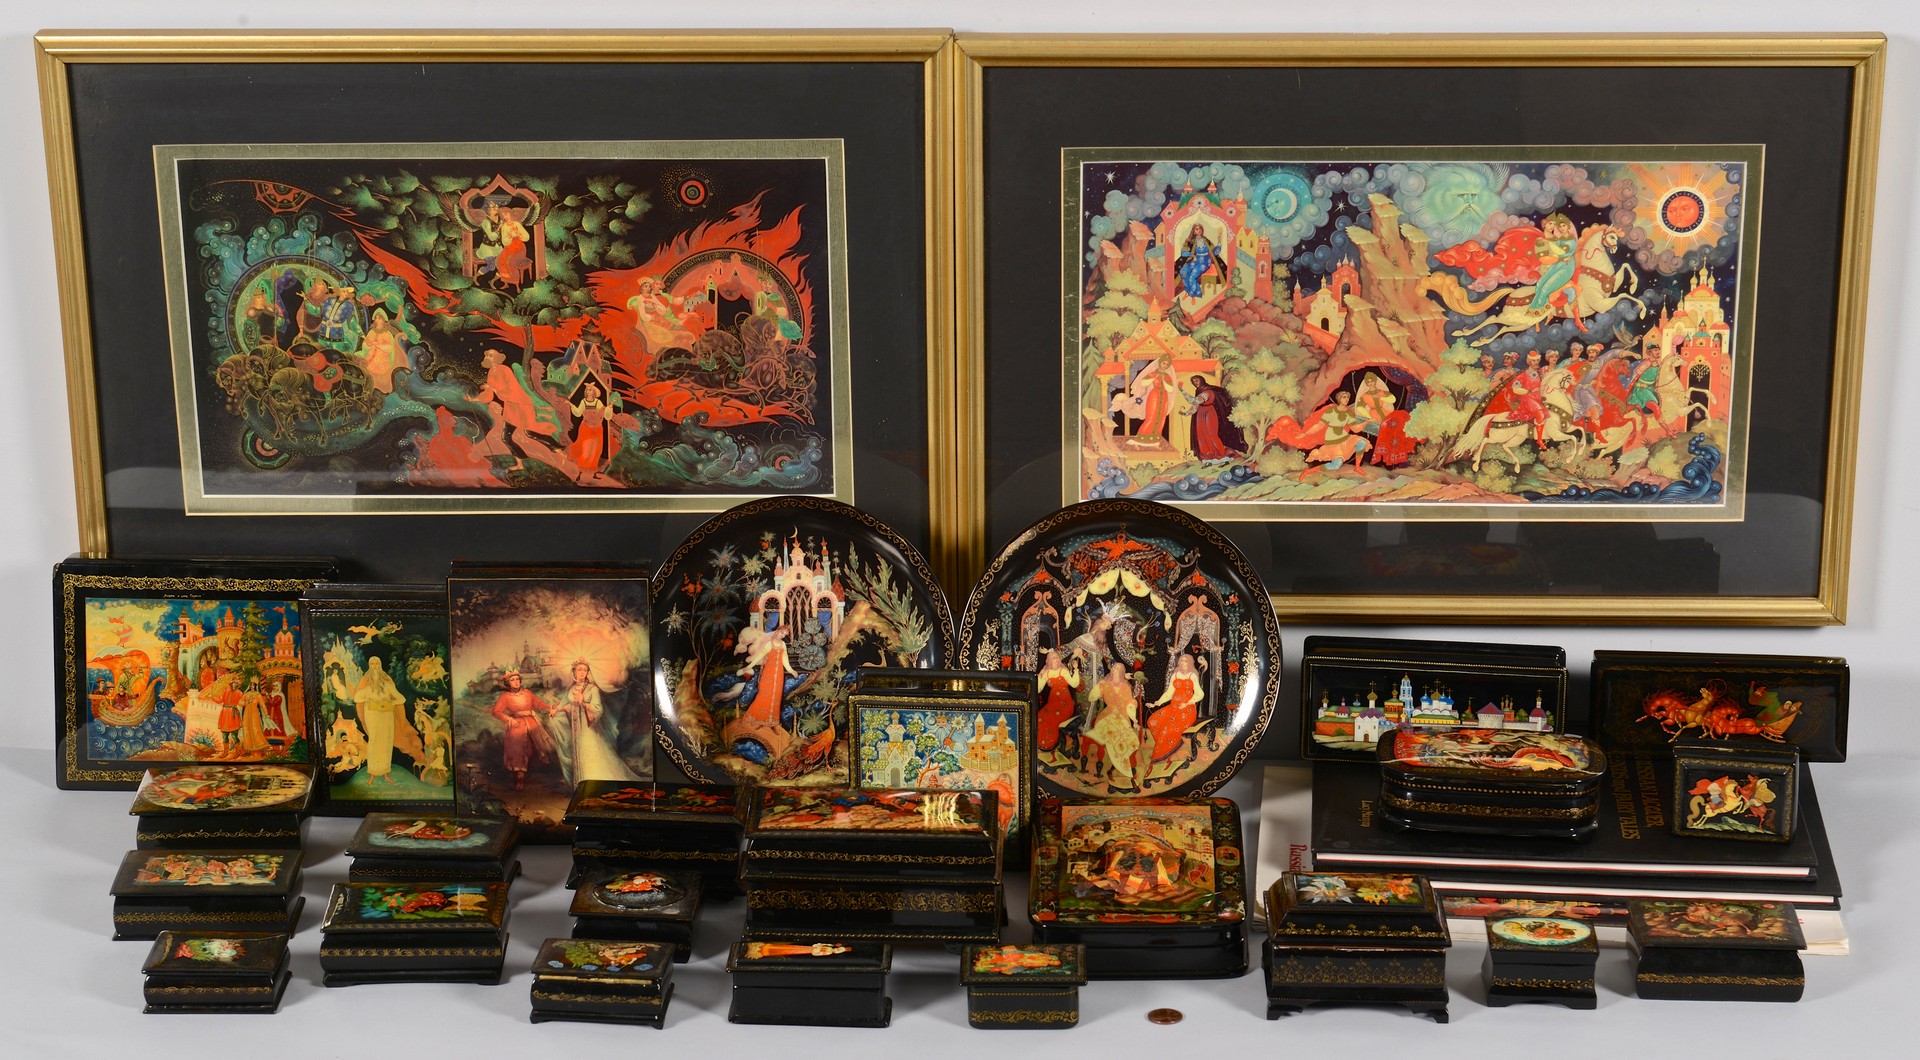 Lot 383: 23 Russian Lacquer Boxes